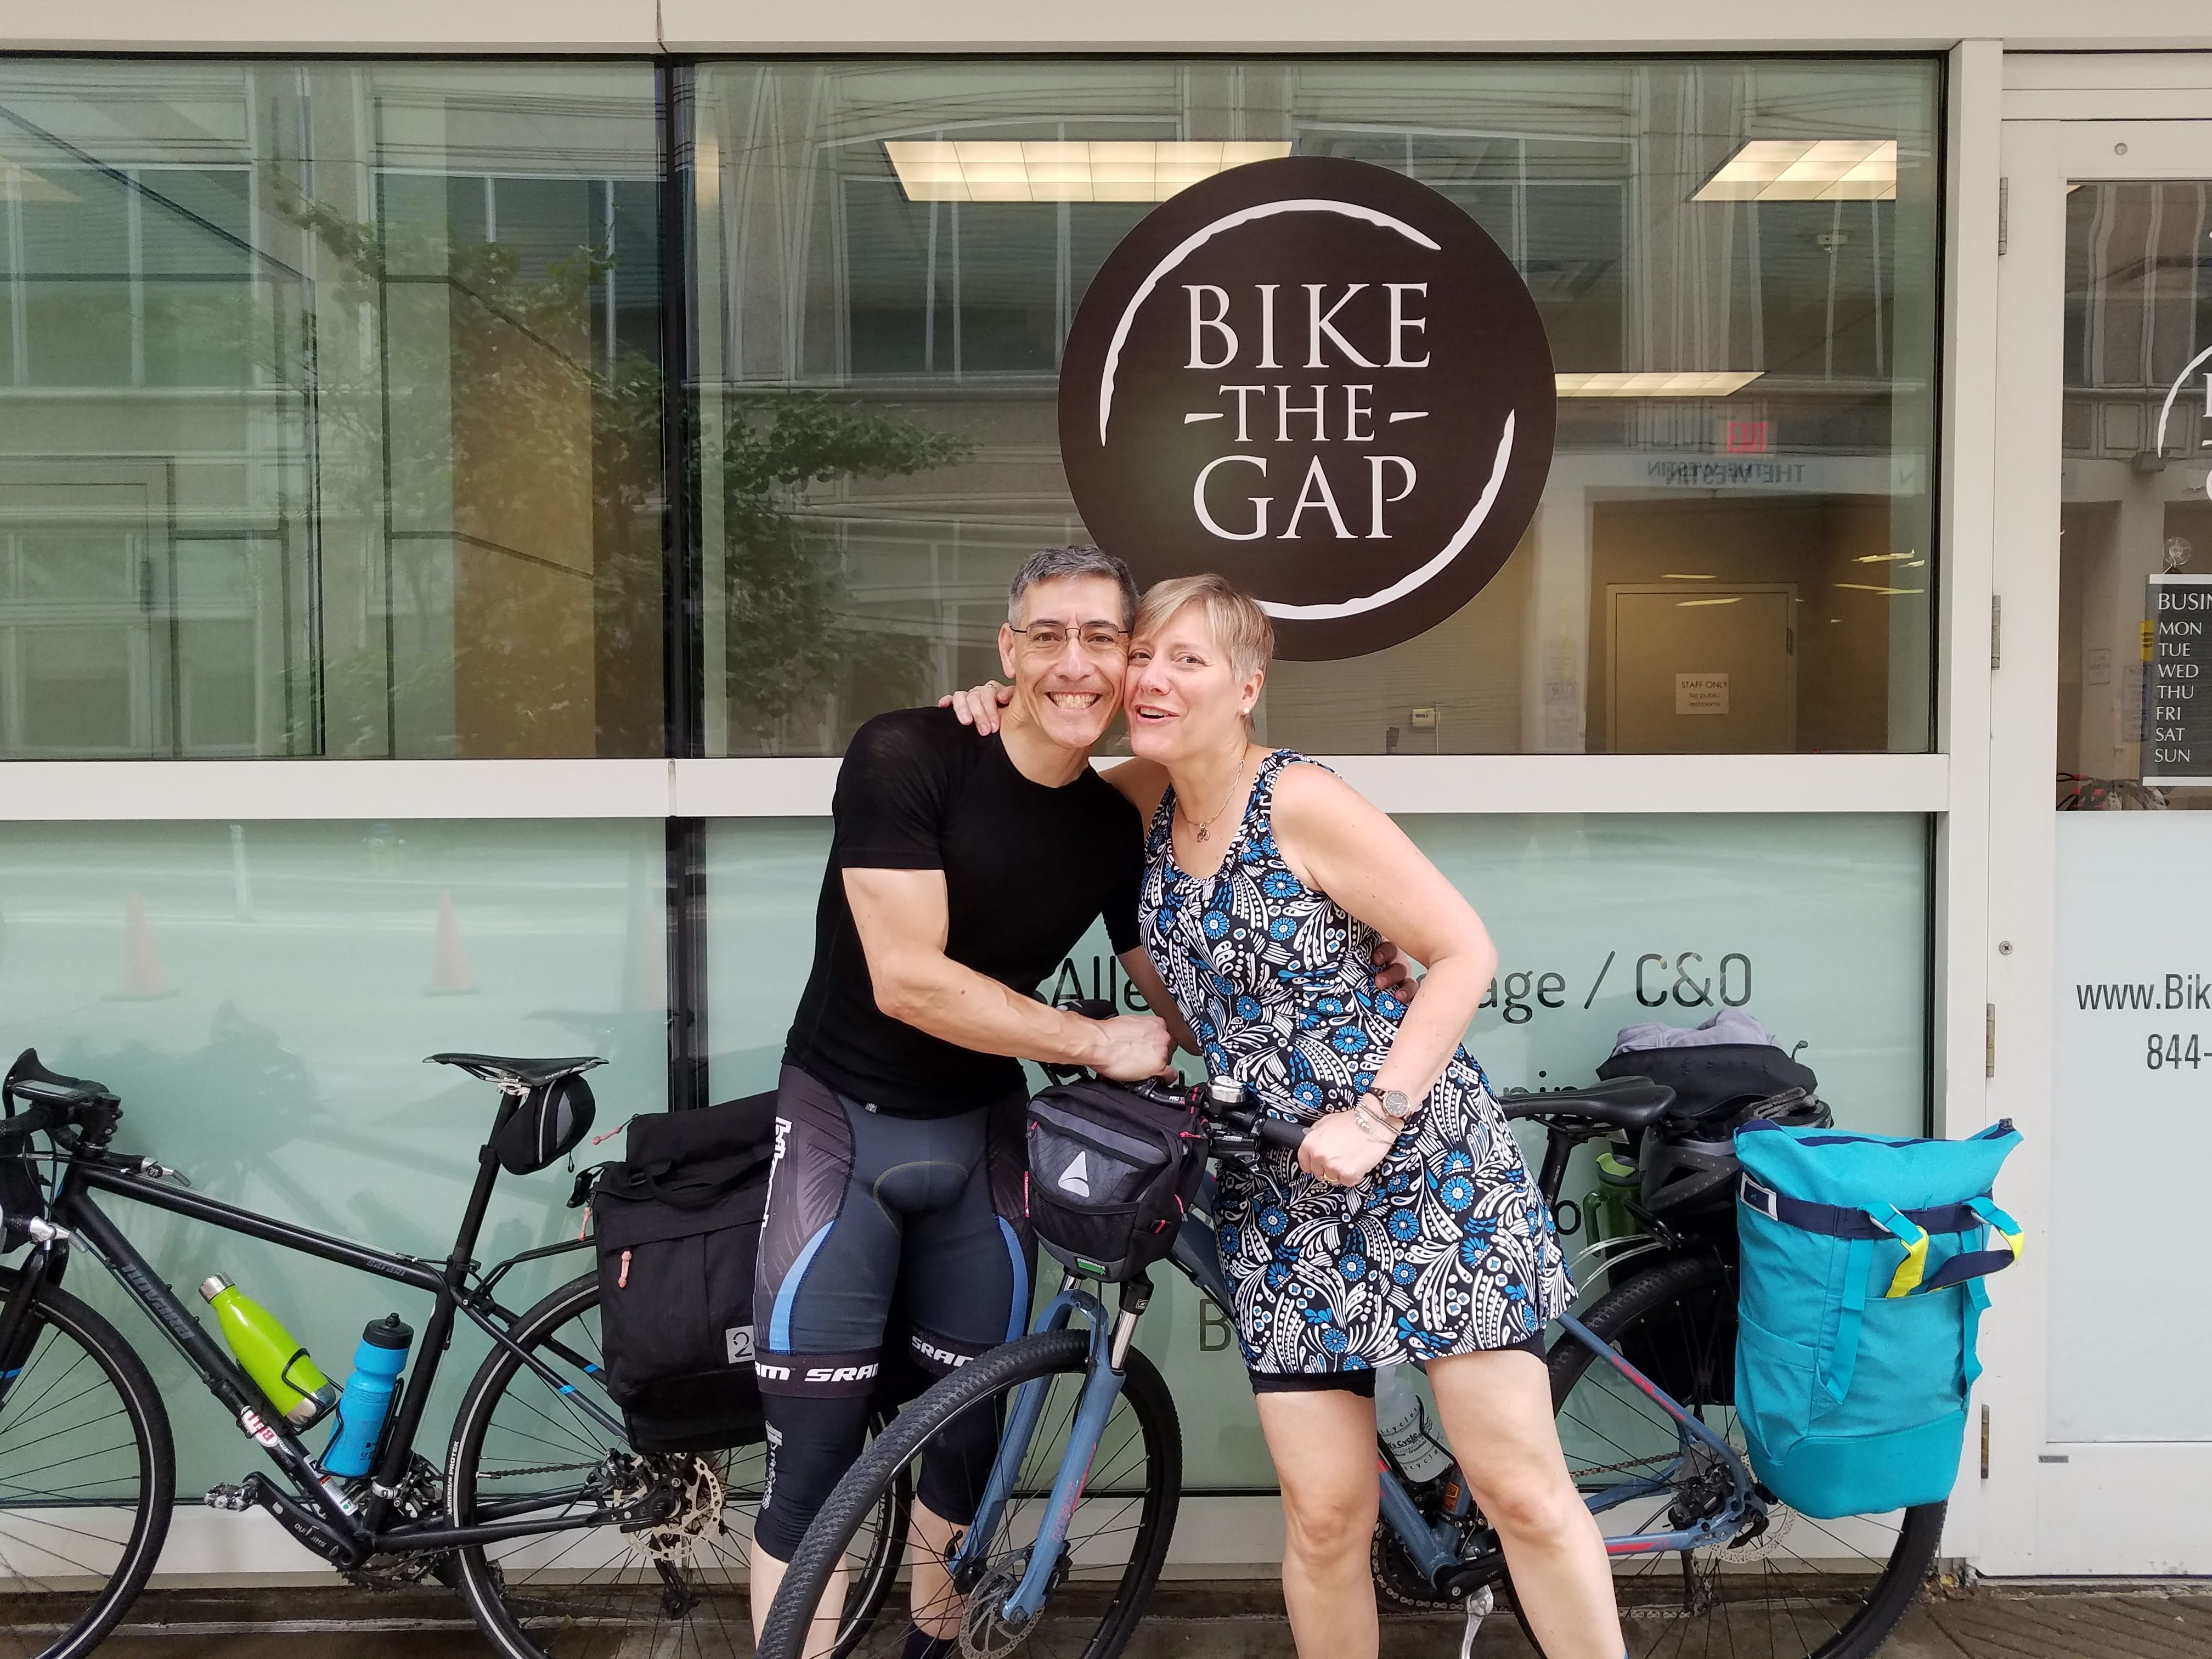 Bike Touring Lessons Learned So Far: Two Days and 84 Miles